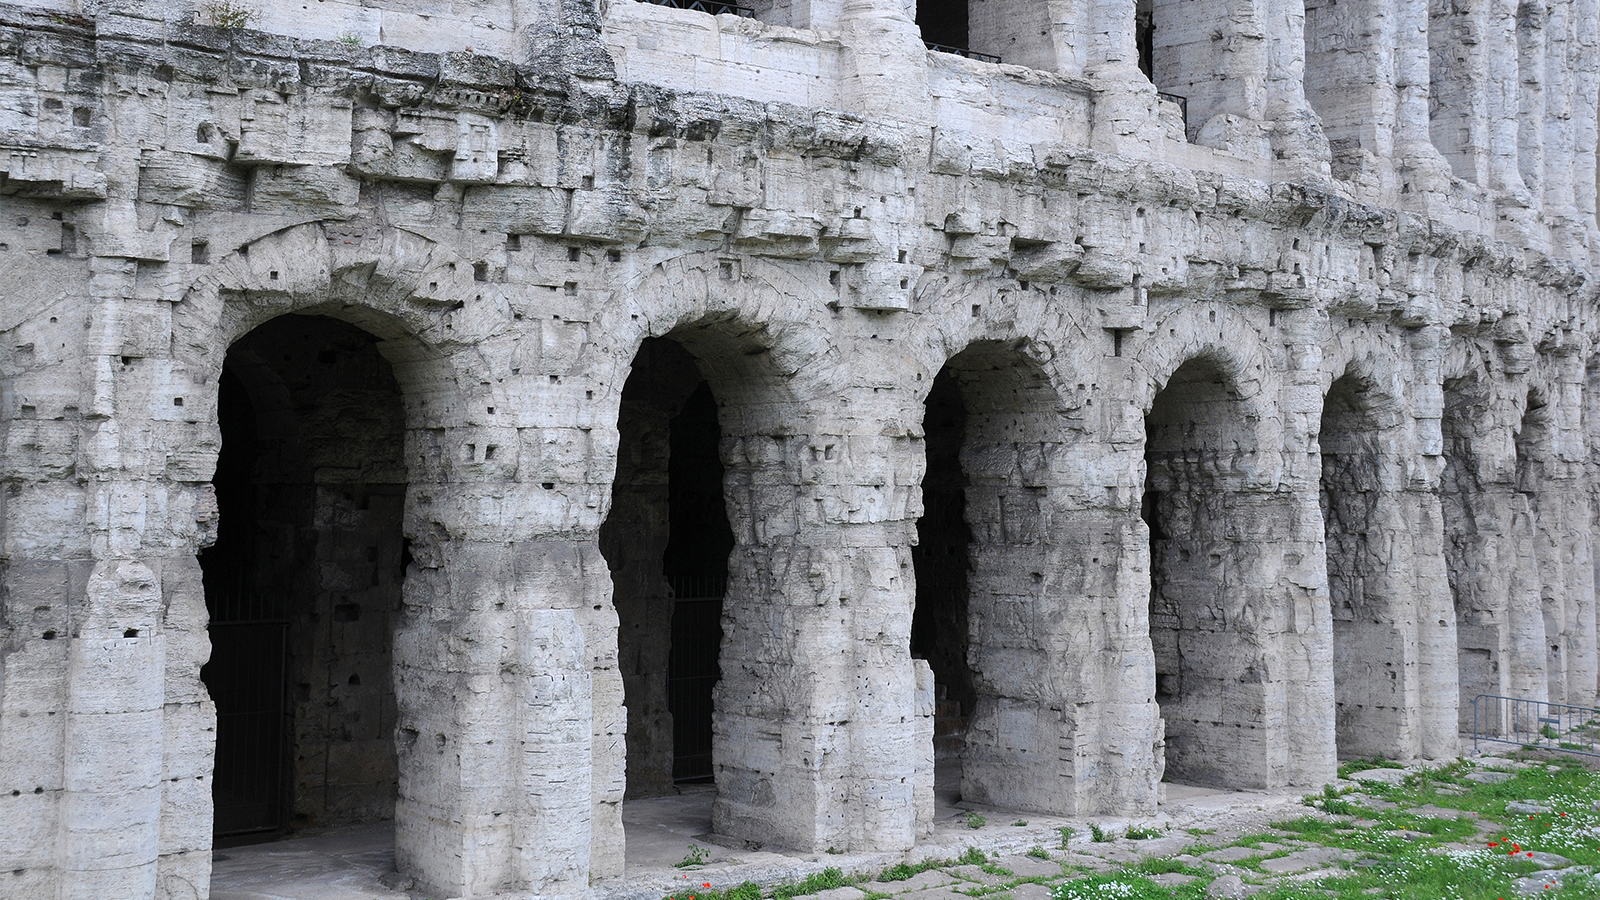 Color photograph of the ground level of the exterior of ancient roman theater, showing a half dozen arched entryways